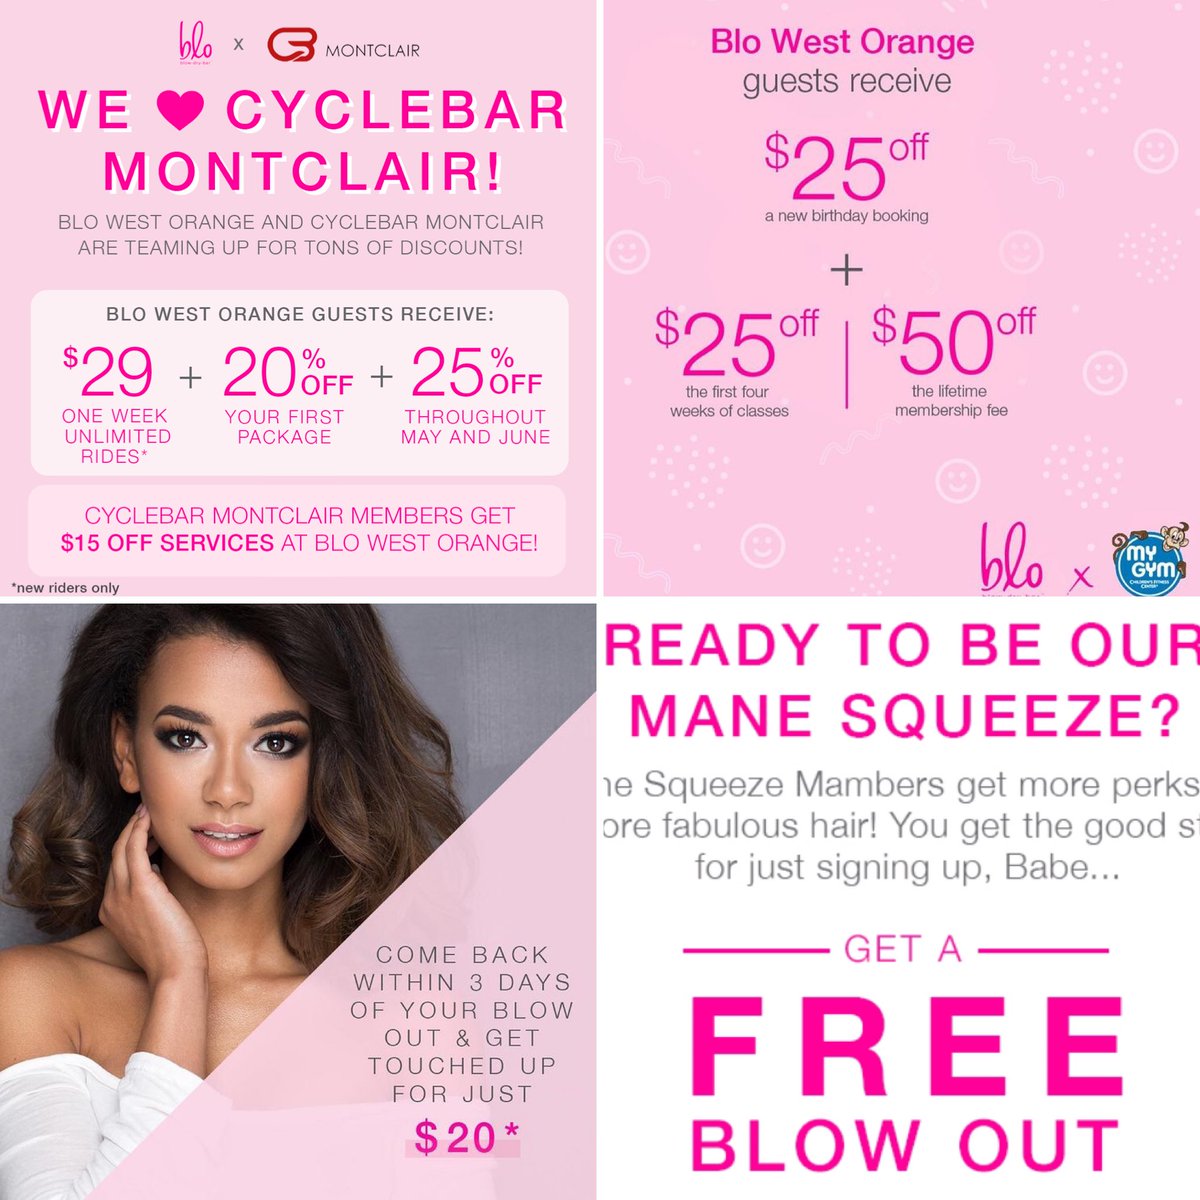 Are you following our partners? @cyclebar @mygymwestorange @MyGymFun #FF & #save with our collaborations on #discount packages for all our clients! #BloWestOrange #MyGym #CycleBarMontclair #WestOrange #Montclair #NJ #HotDeals🎉🛍💕